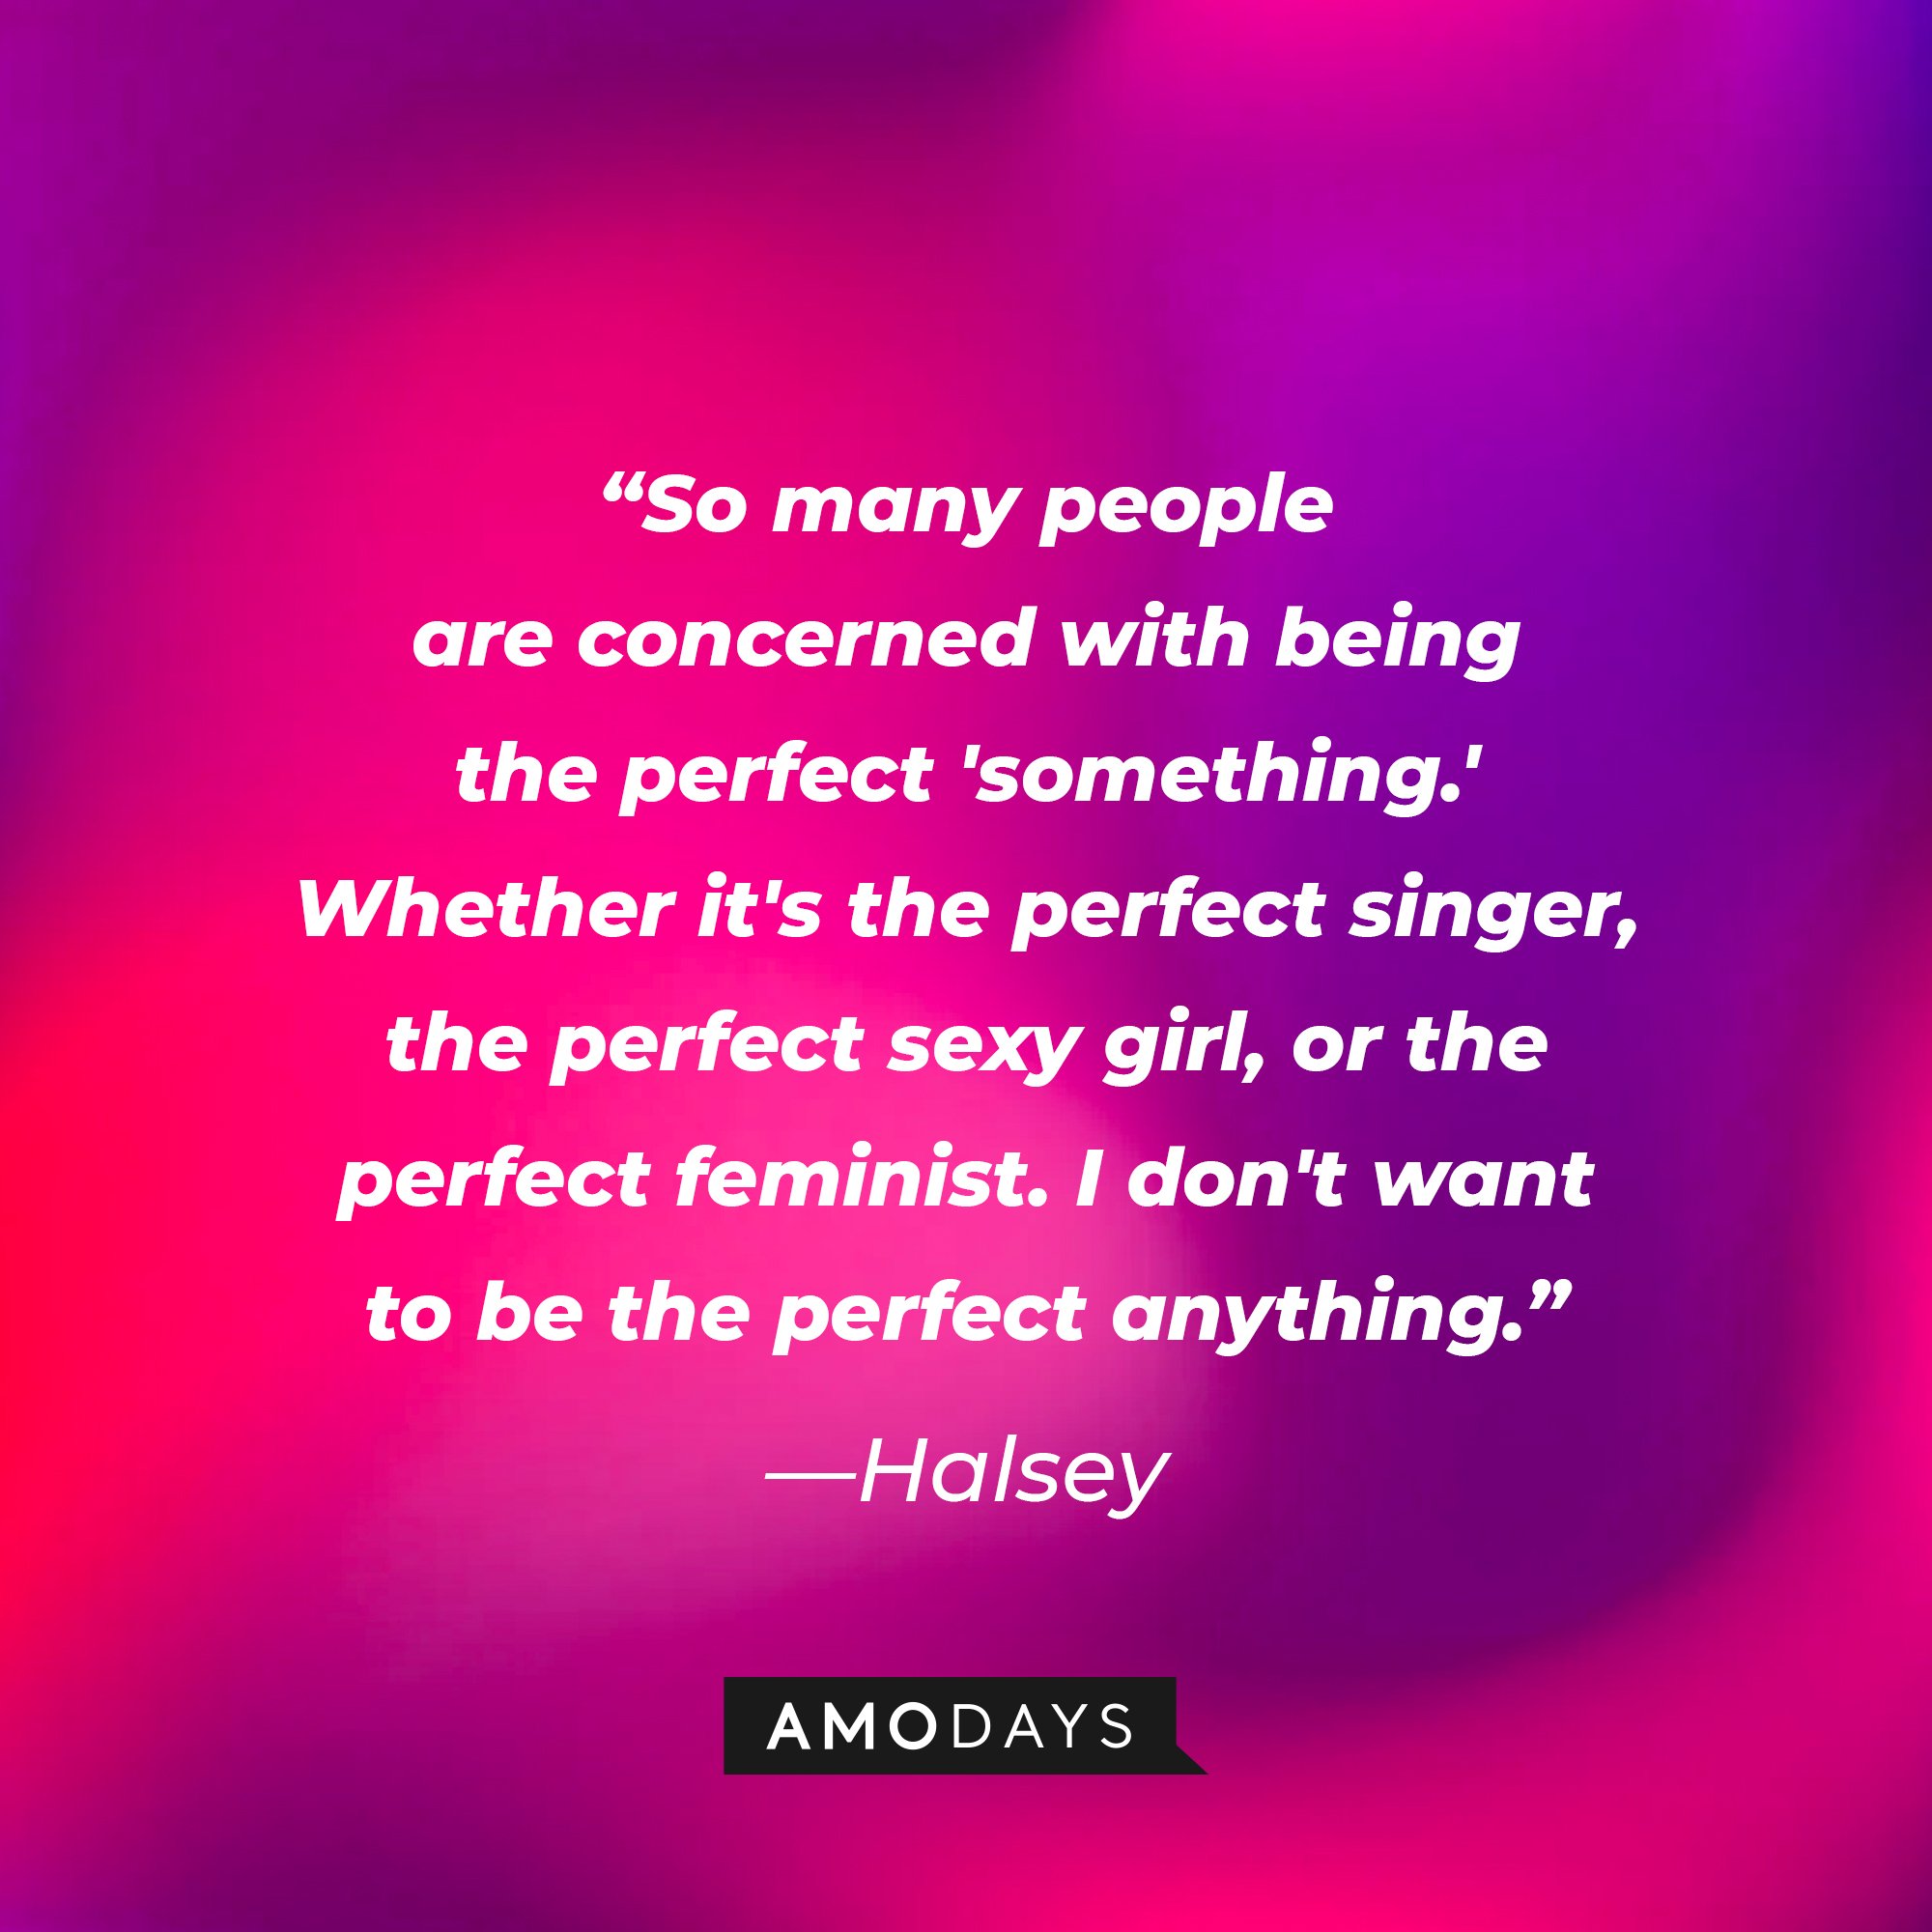  Halsey’s quote: "So many people are concerned with being the perfect 'something.' Whether it's the perfect singer, the perfect sexy girl, or the perfect feminist. I don't want to be the perfect anything." | Image: AmoDays